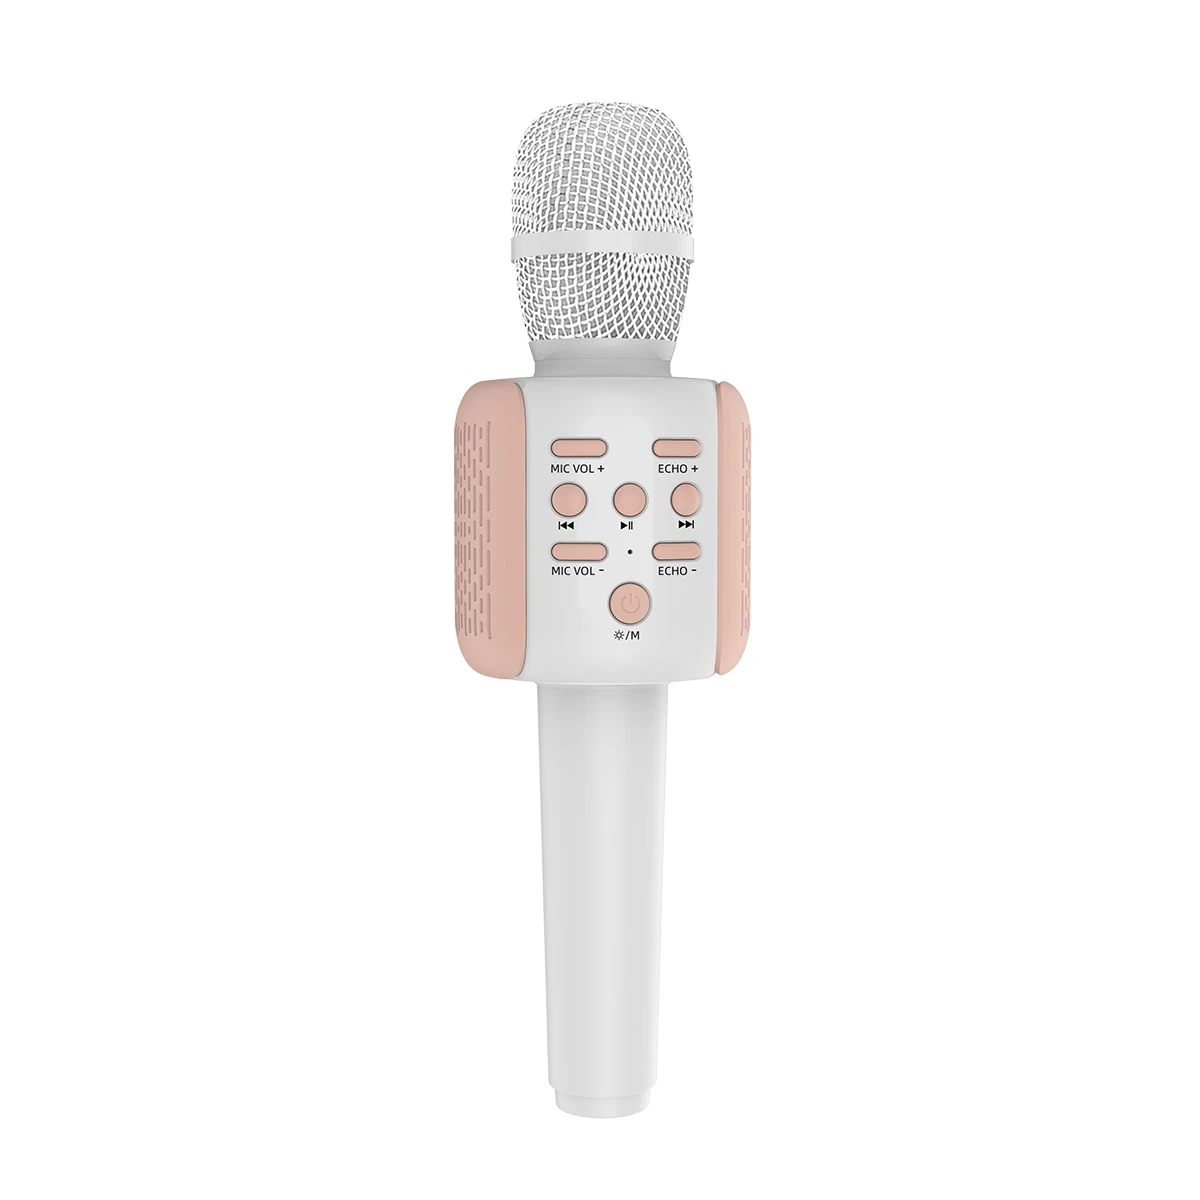 

Kids Wireless Music Singing Playing Microphone Ktv Speaker with Microphone Handheld Karaoke mics for Home Party Bluetooths mic